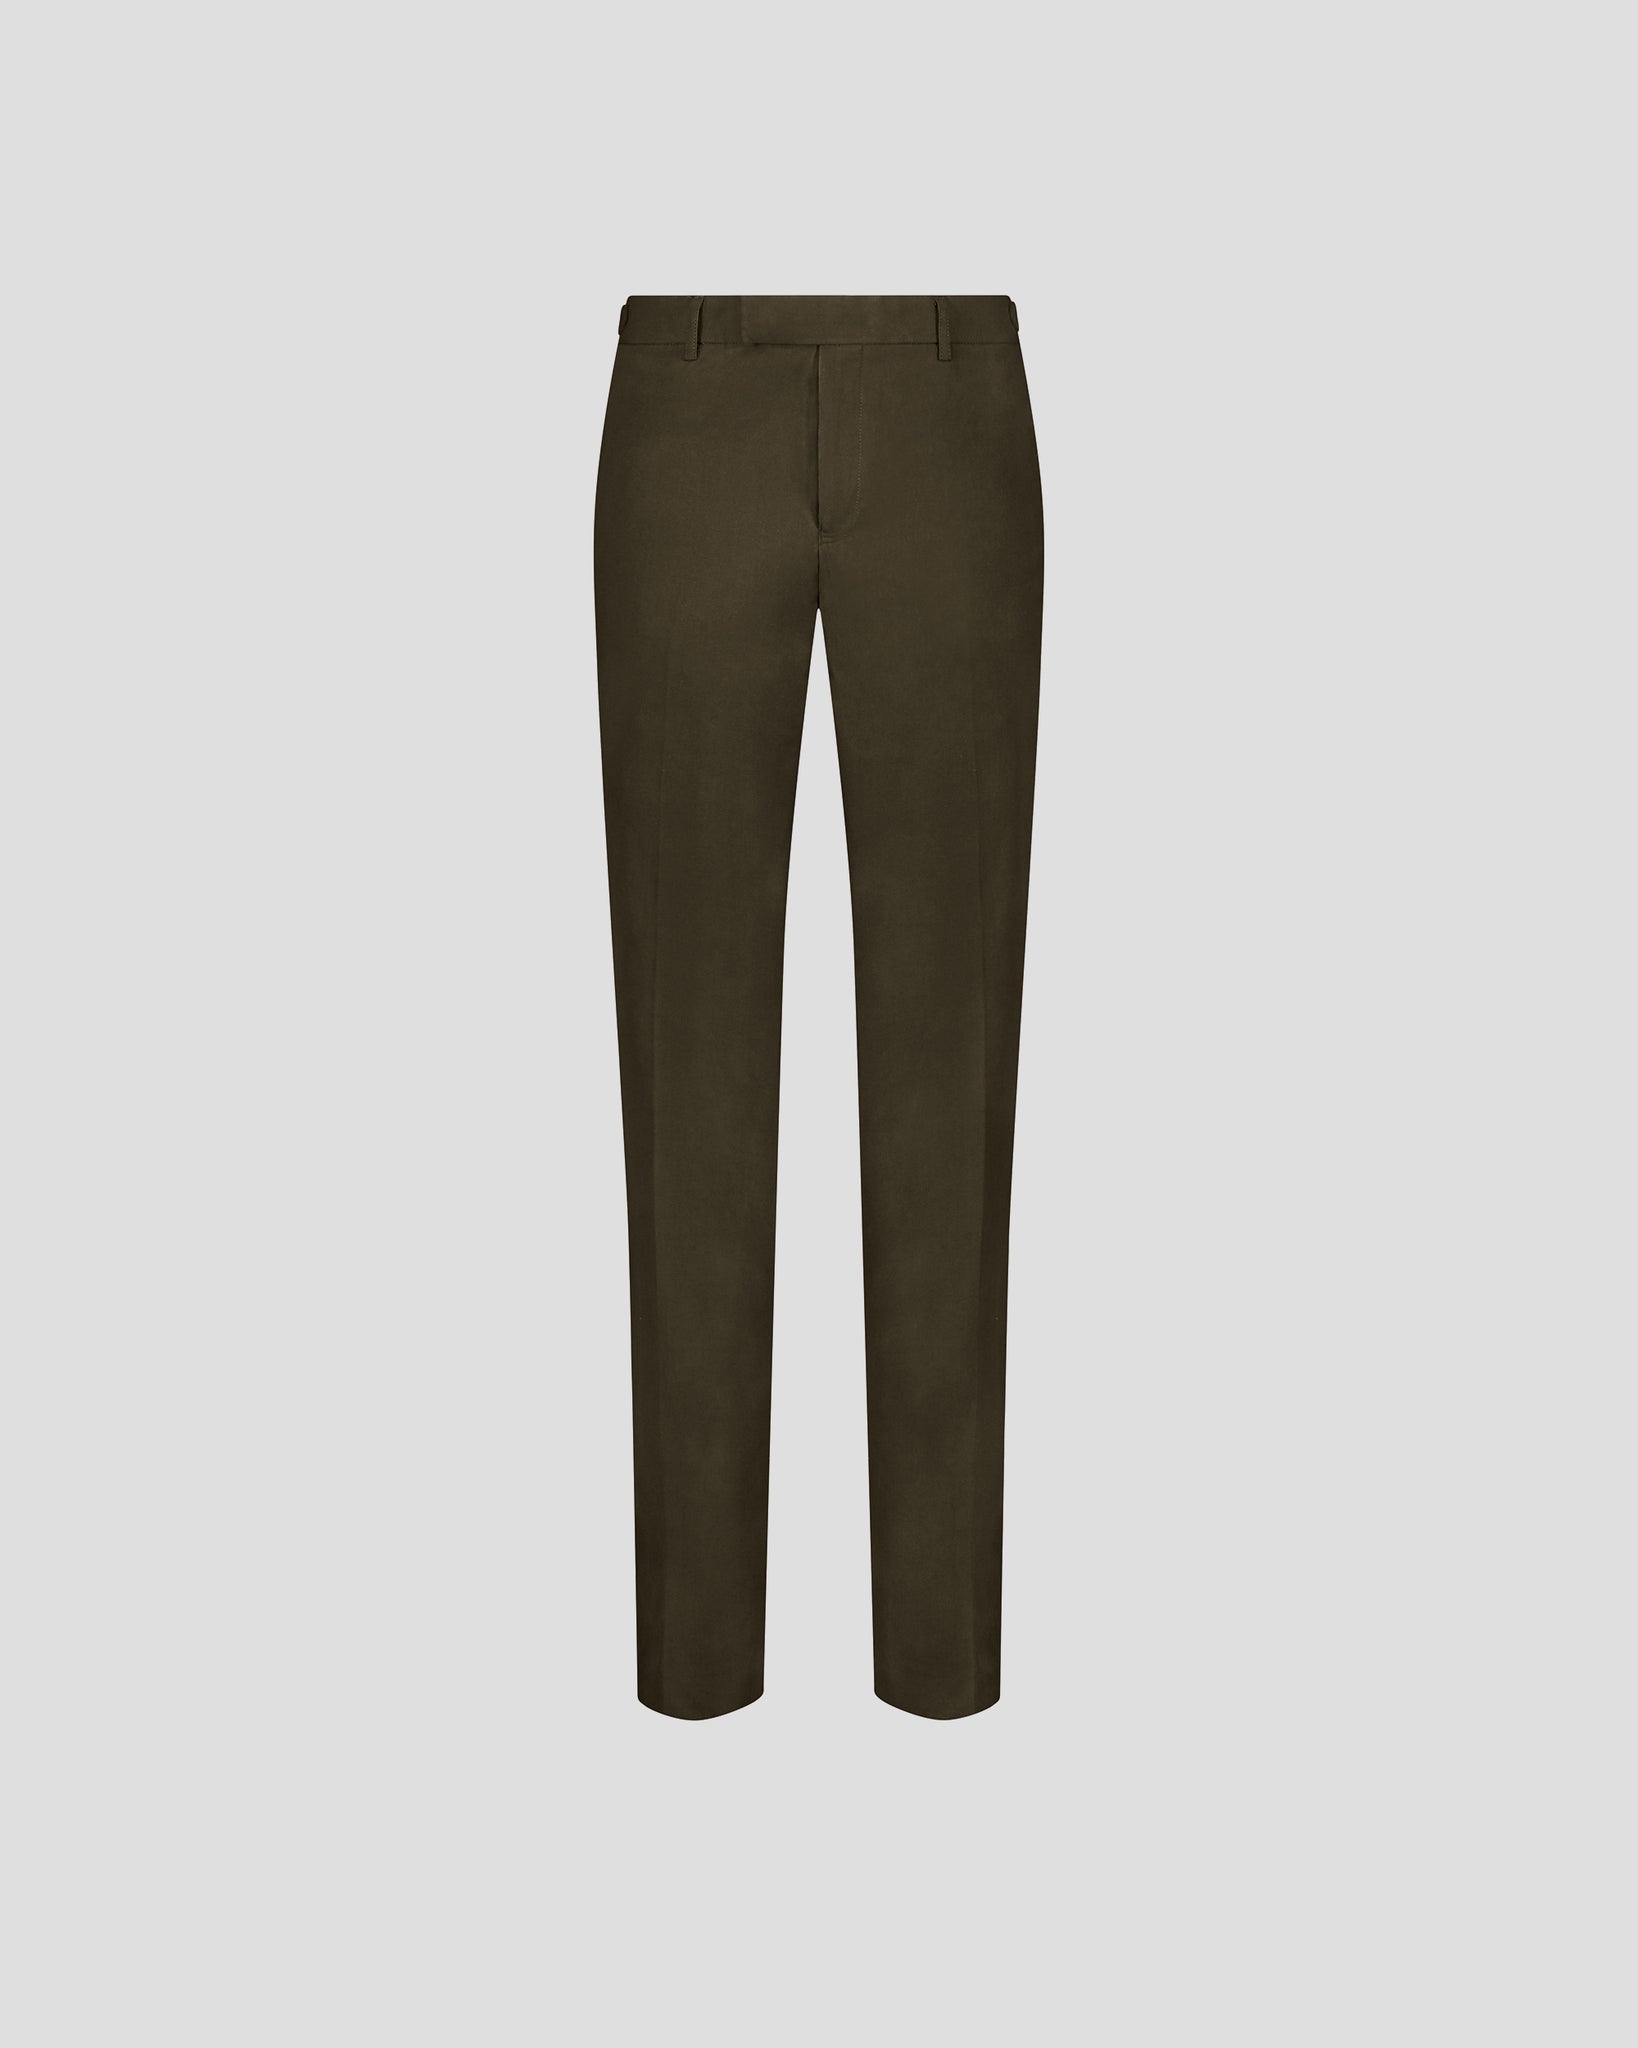 Southern Gents Slim Trouser - Olive